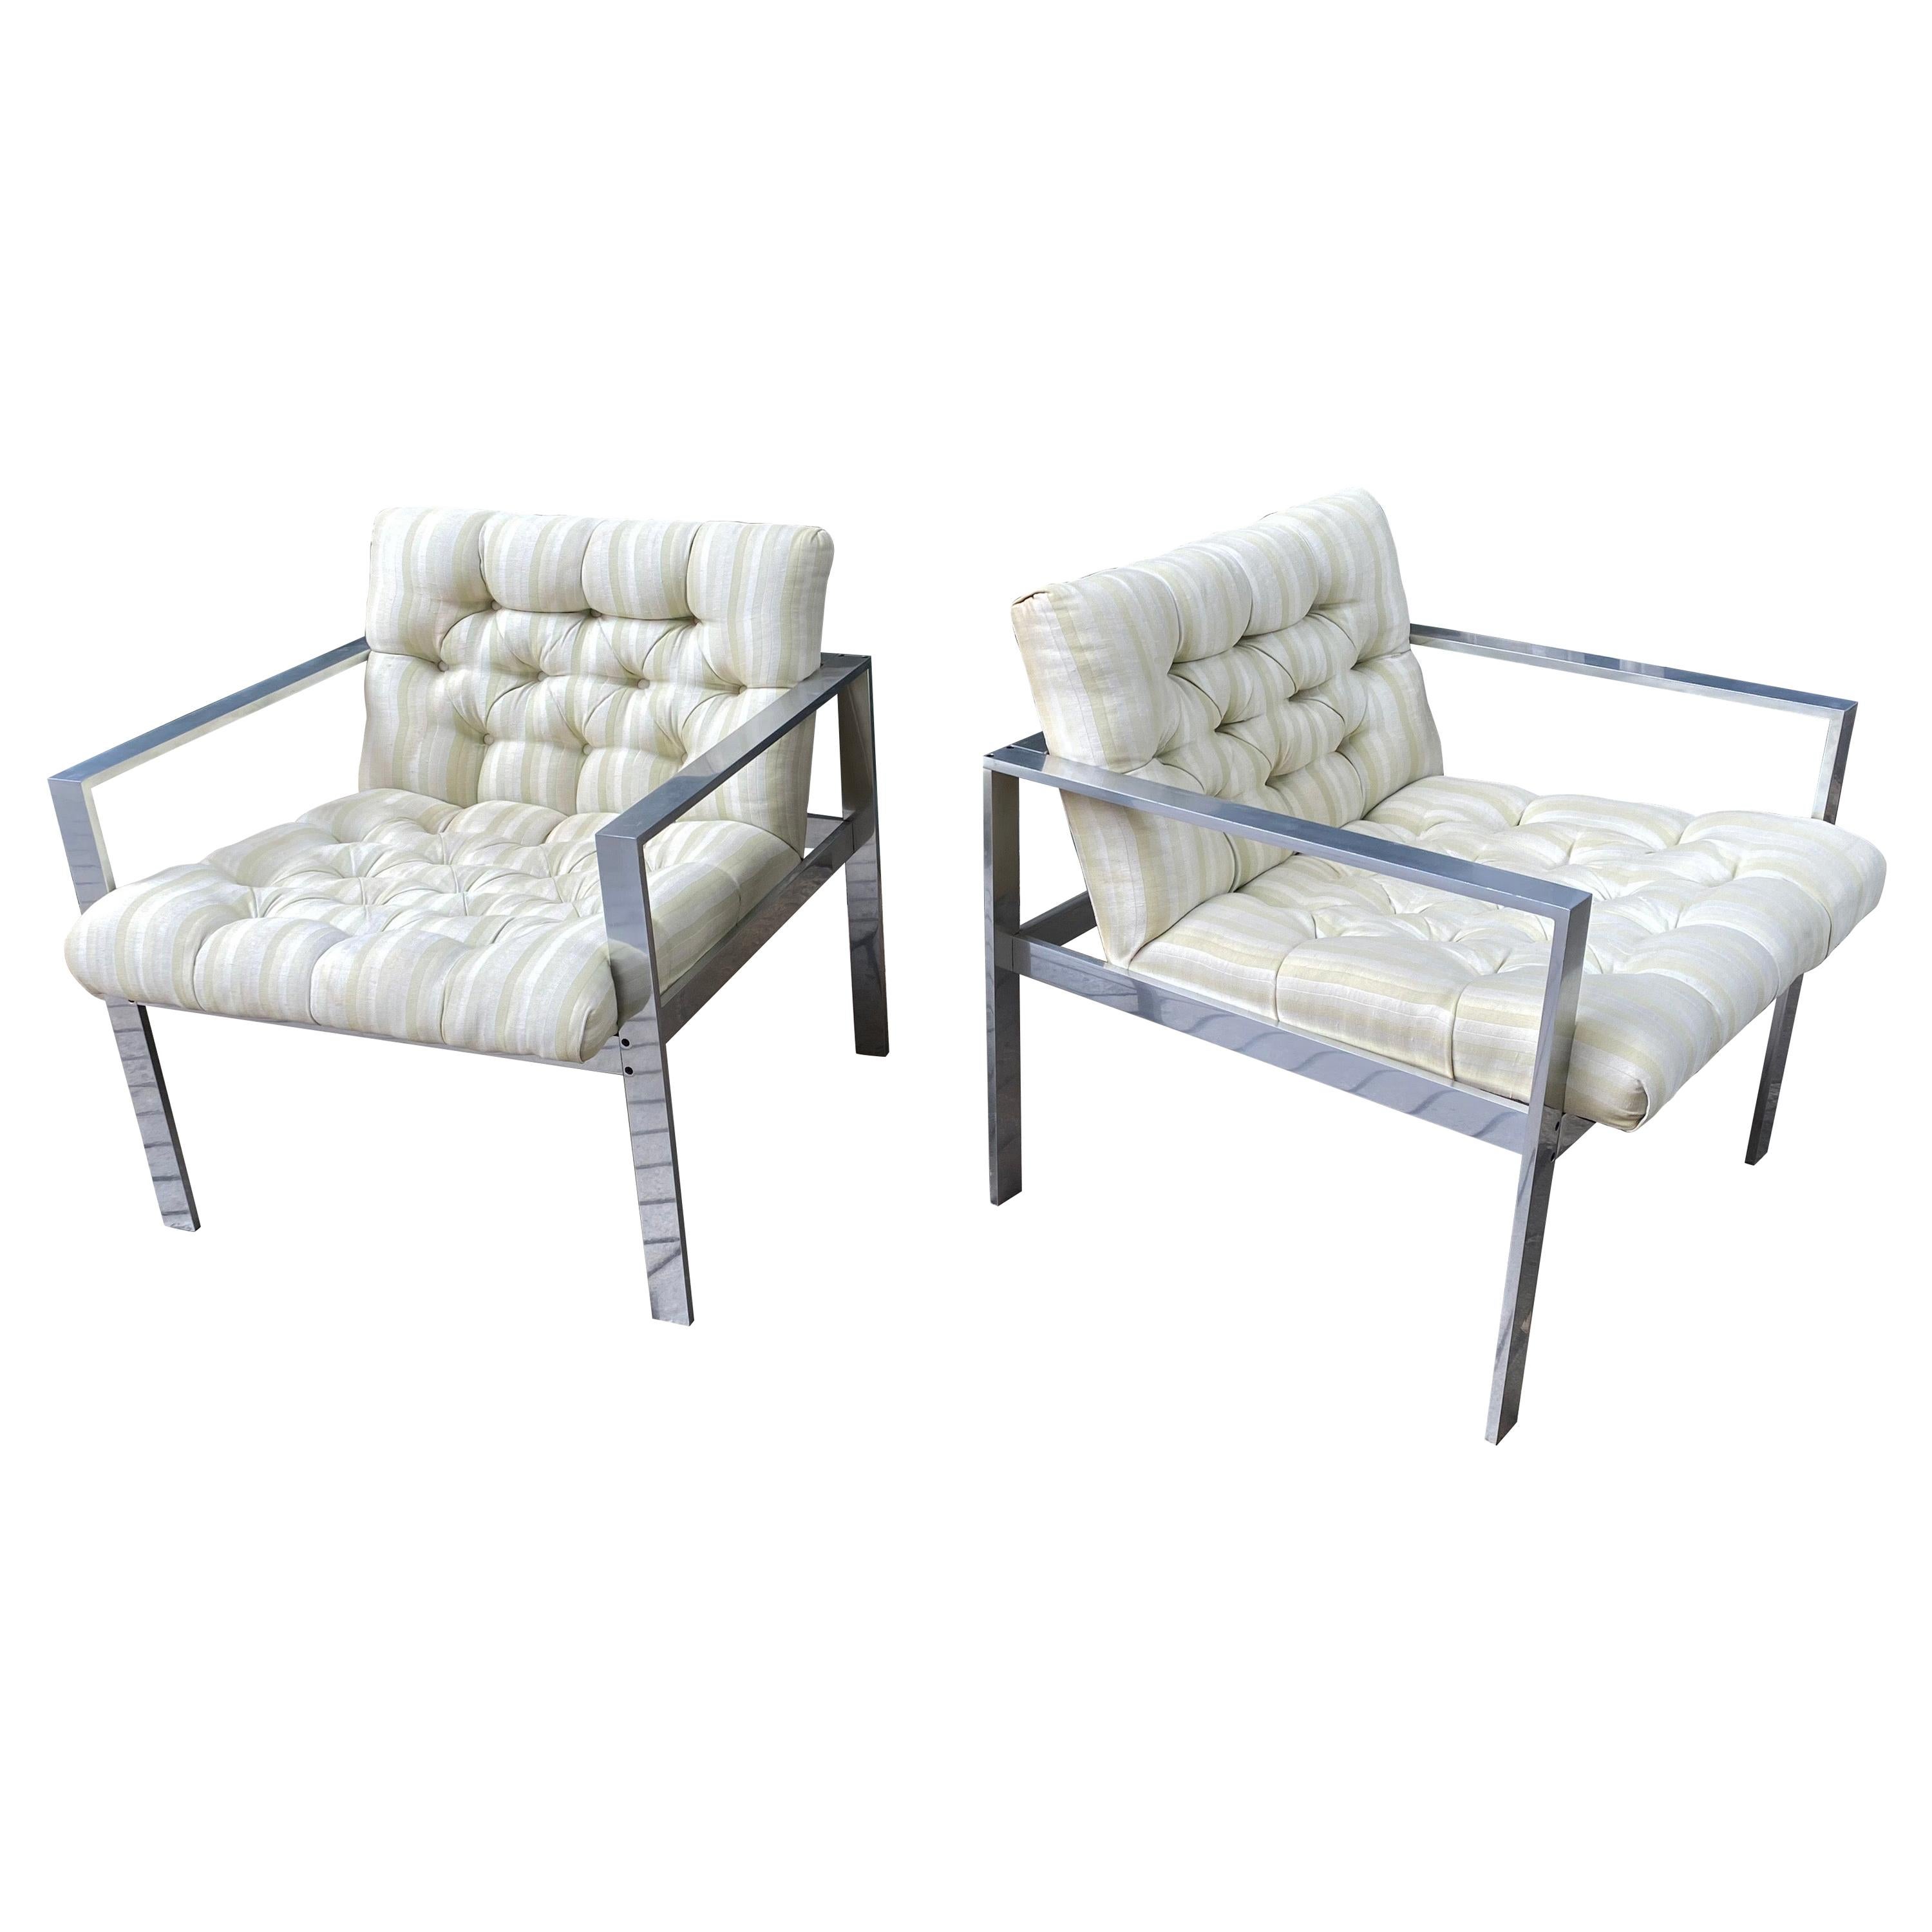 Harvey Probber Aluminum Lounge Chairs, Sold as a Pair